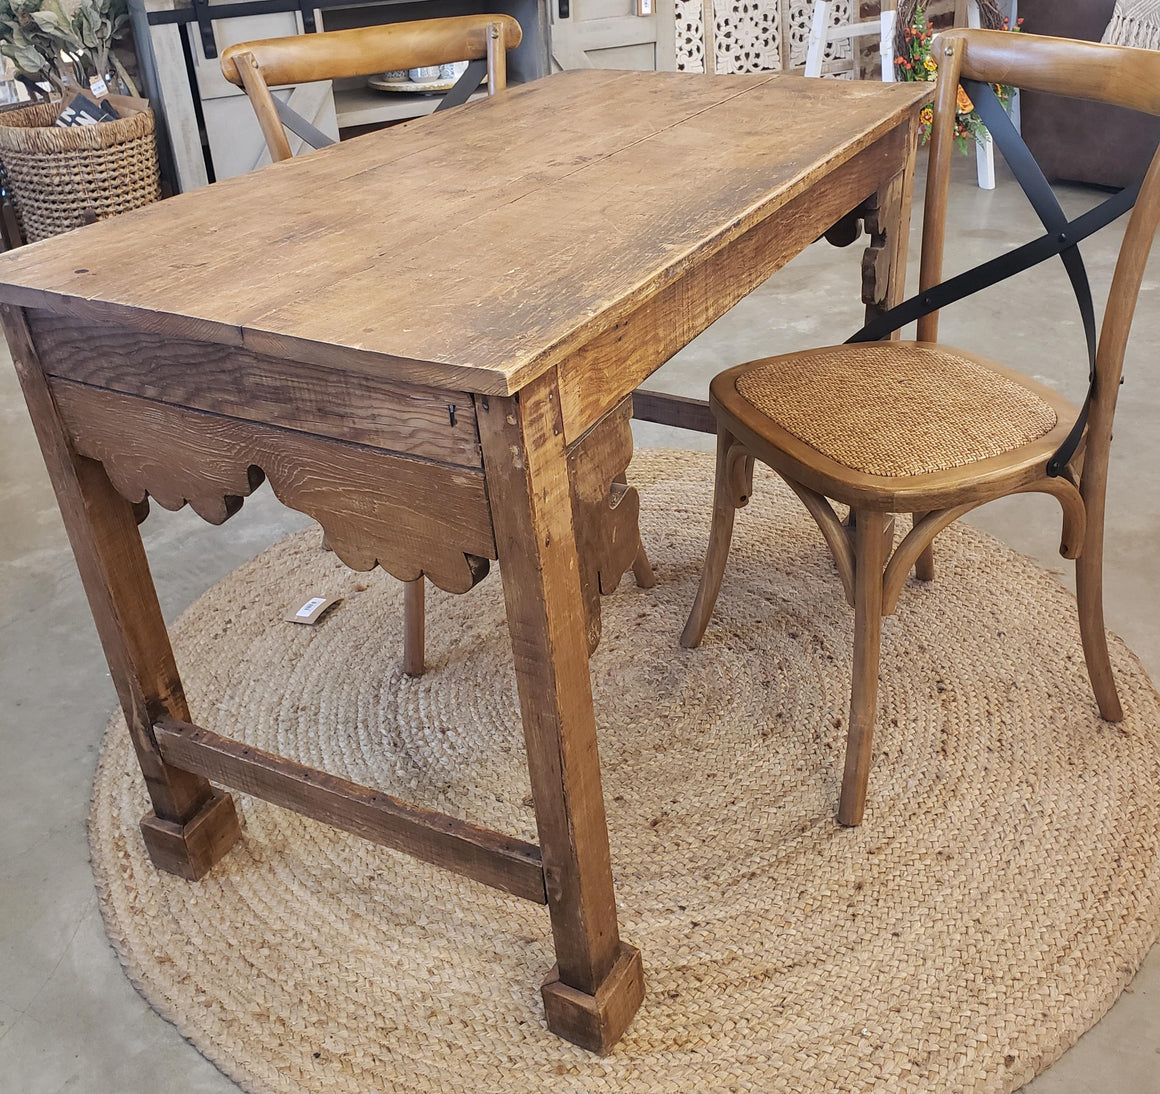 Antique Wood Table with Chairs